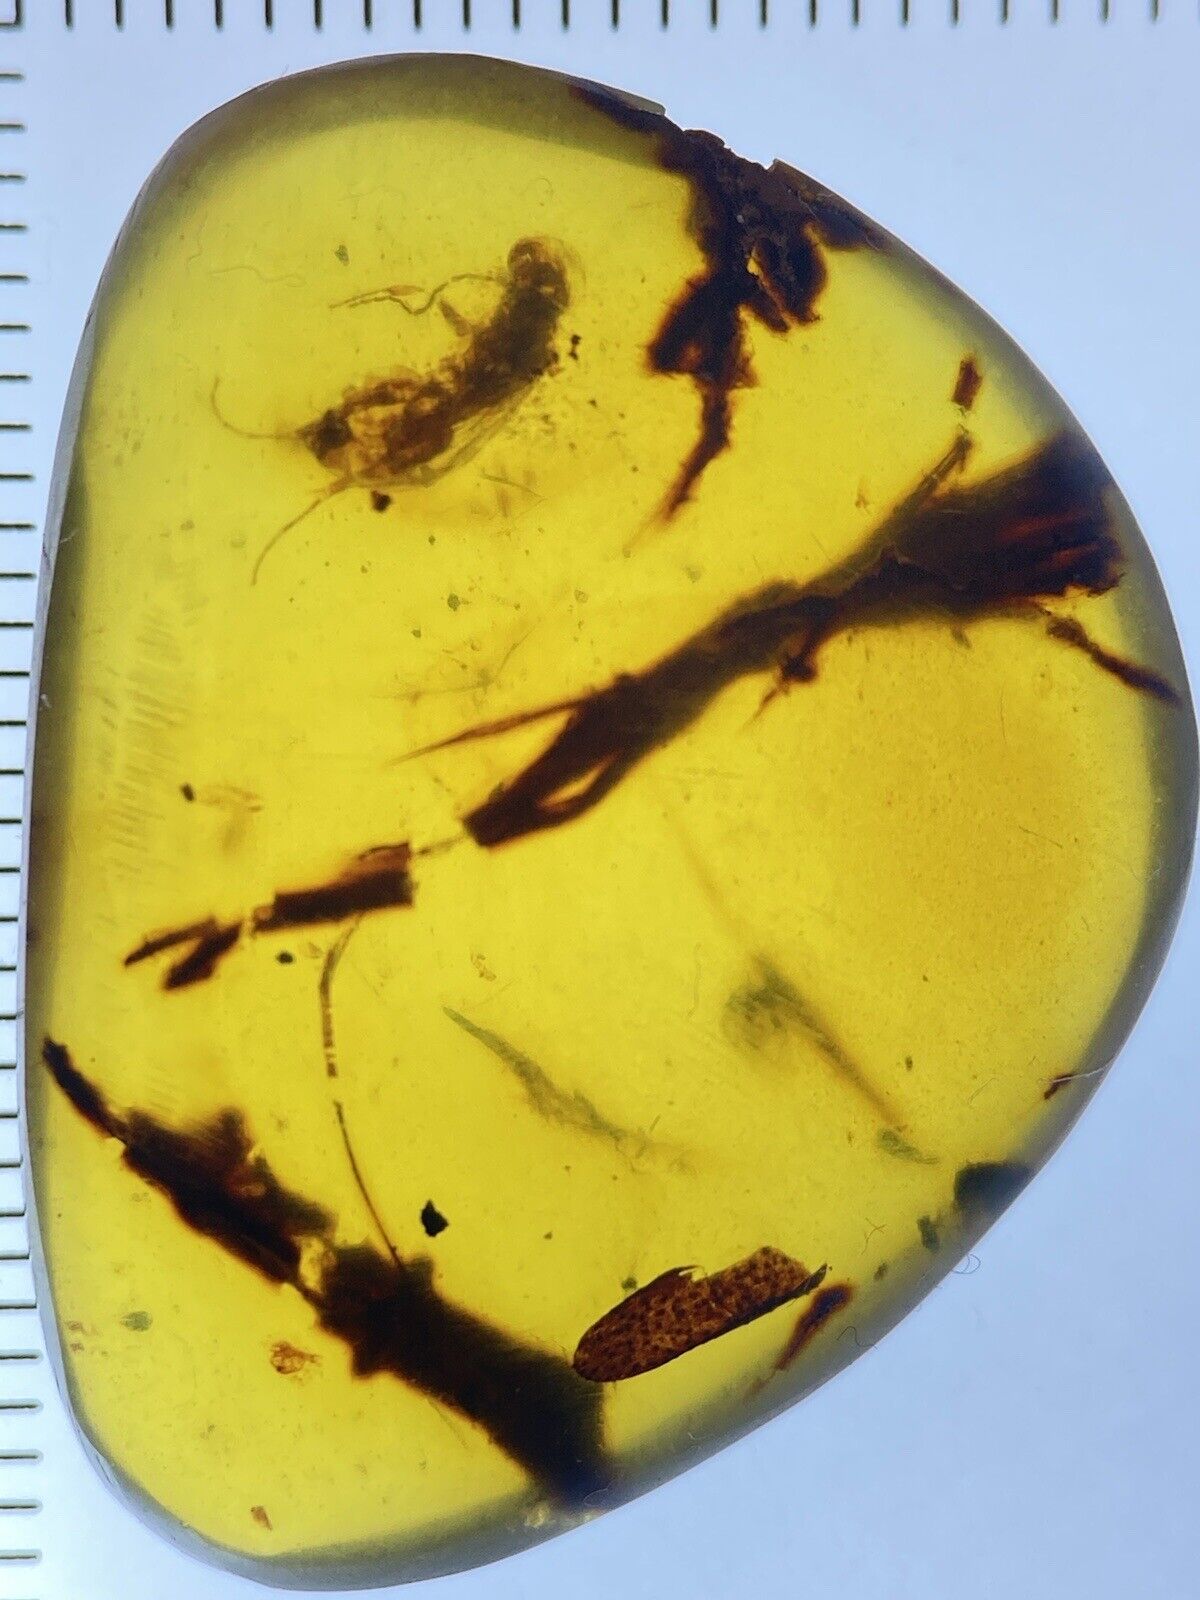 Rare Skin, Branches & Large Flying Insect Fossil, Genuine Burmite Amber, 98MYO